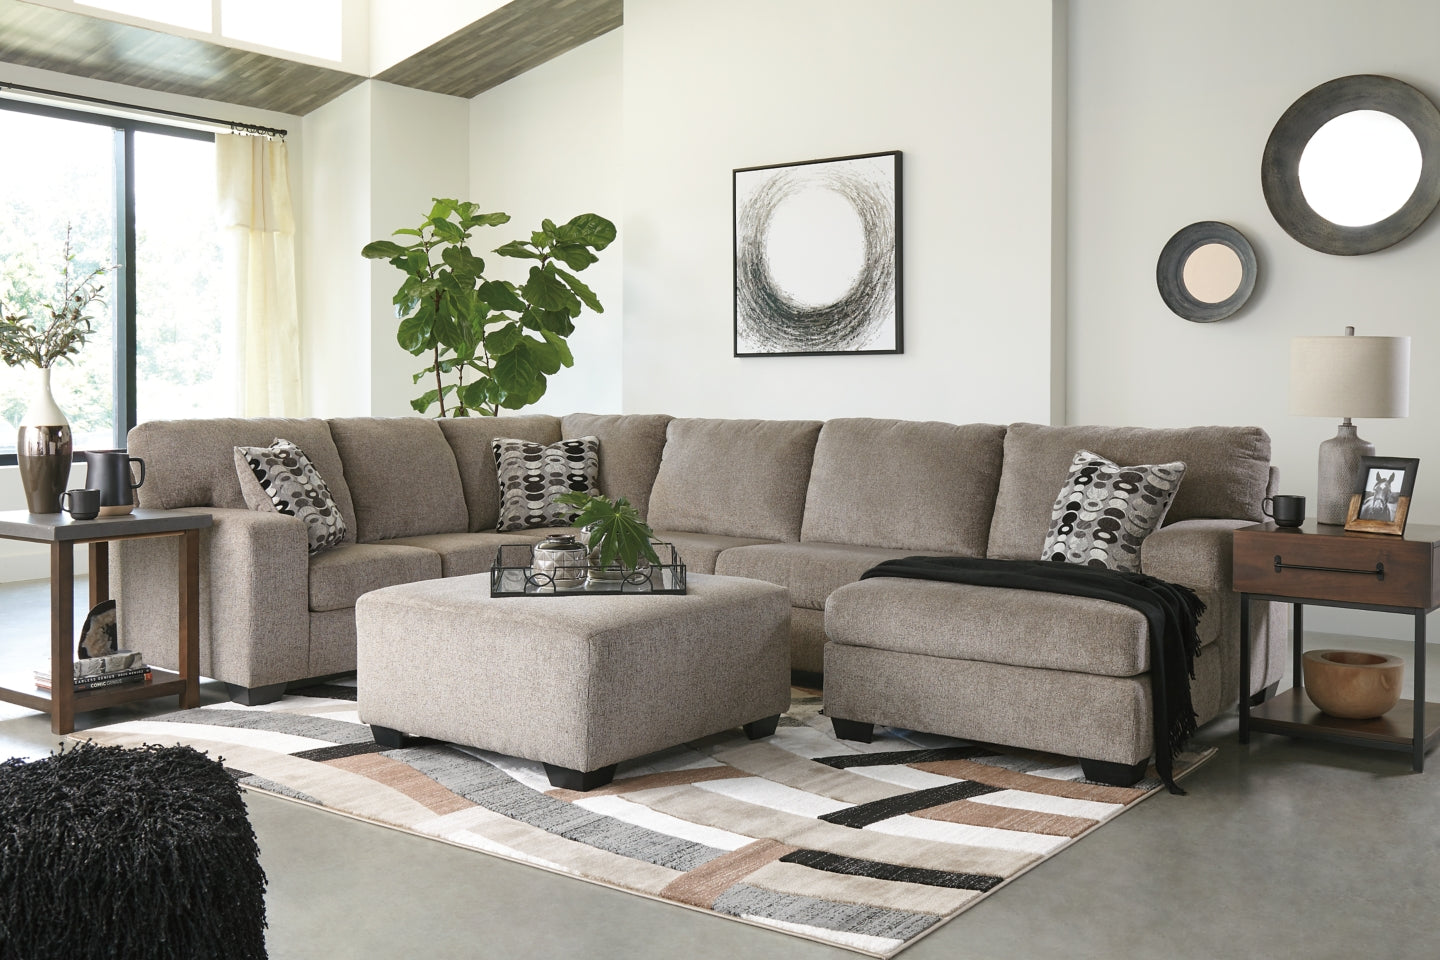 Ballinasloe 3-Piece Sectional with Chaise - 80703S2